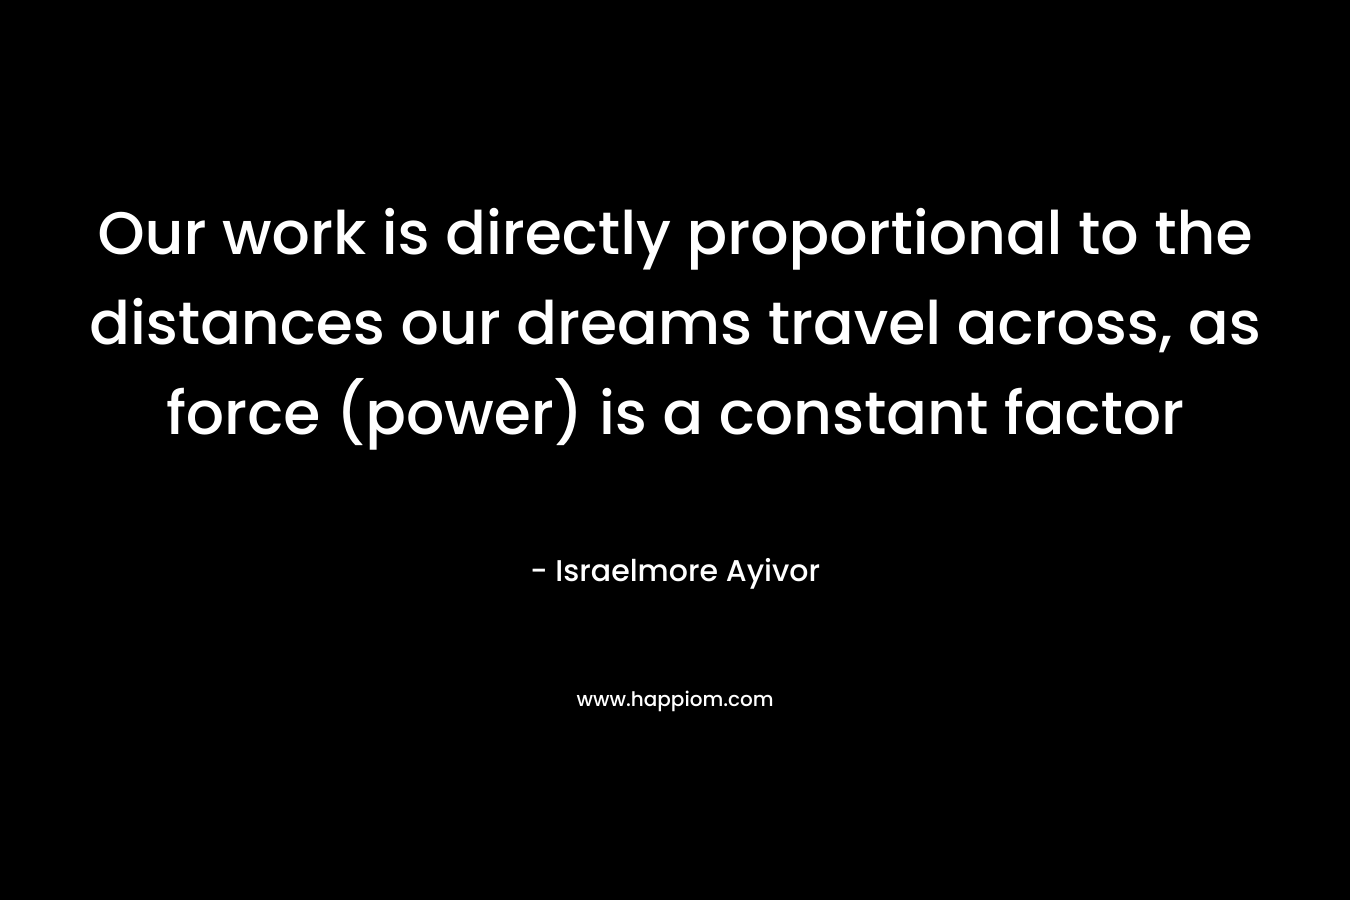 Our work is directly proportional to the distances our dreams travel across, as force (power) is a constant factor – Israelmore Ayivor